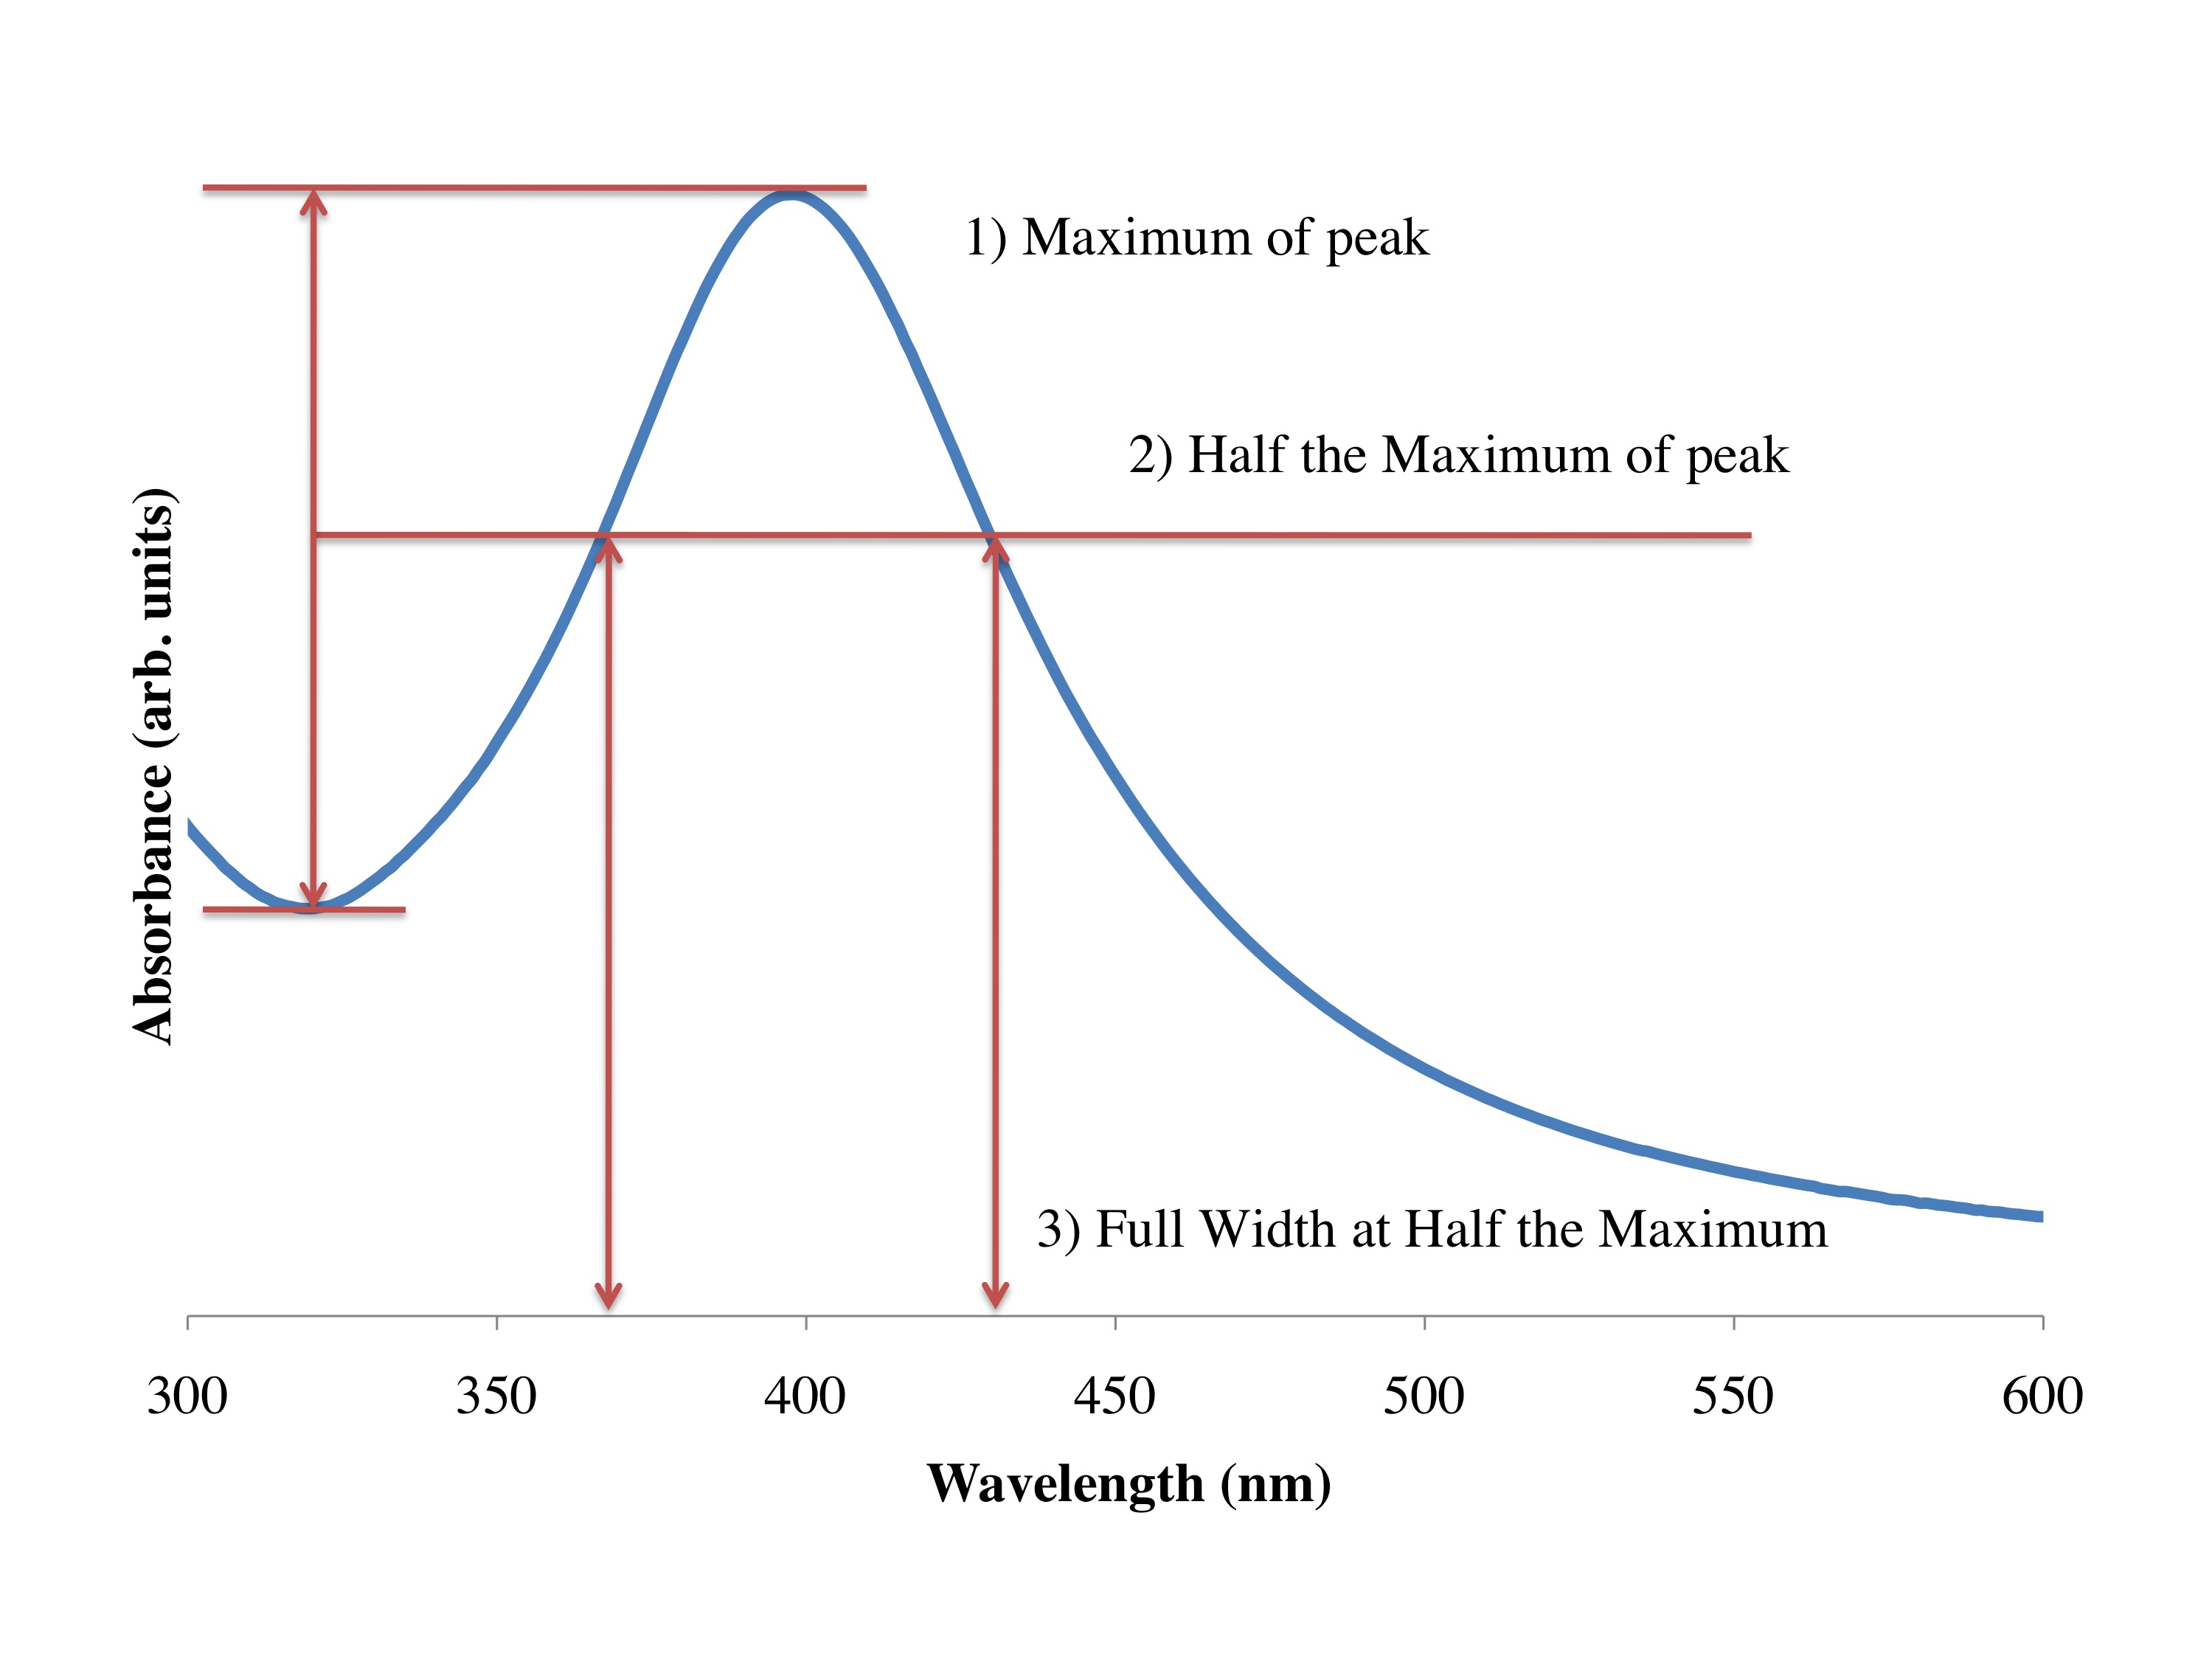 A picture showing three steps to get the full width at half maximum for the UV-vis sprectra.